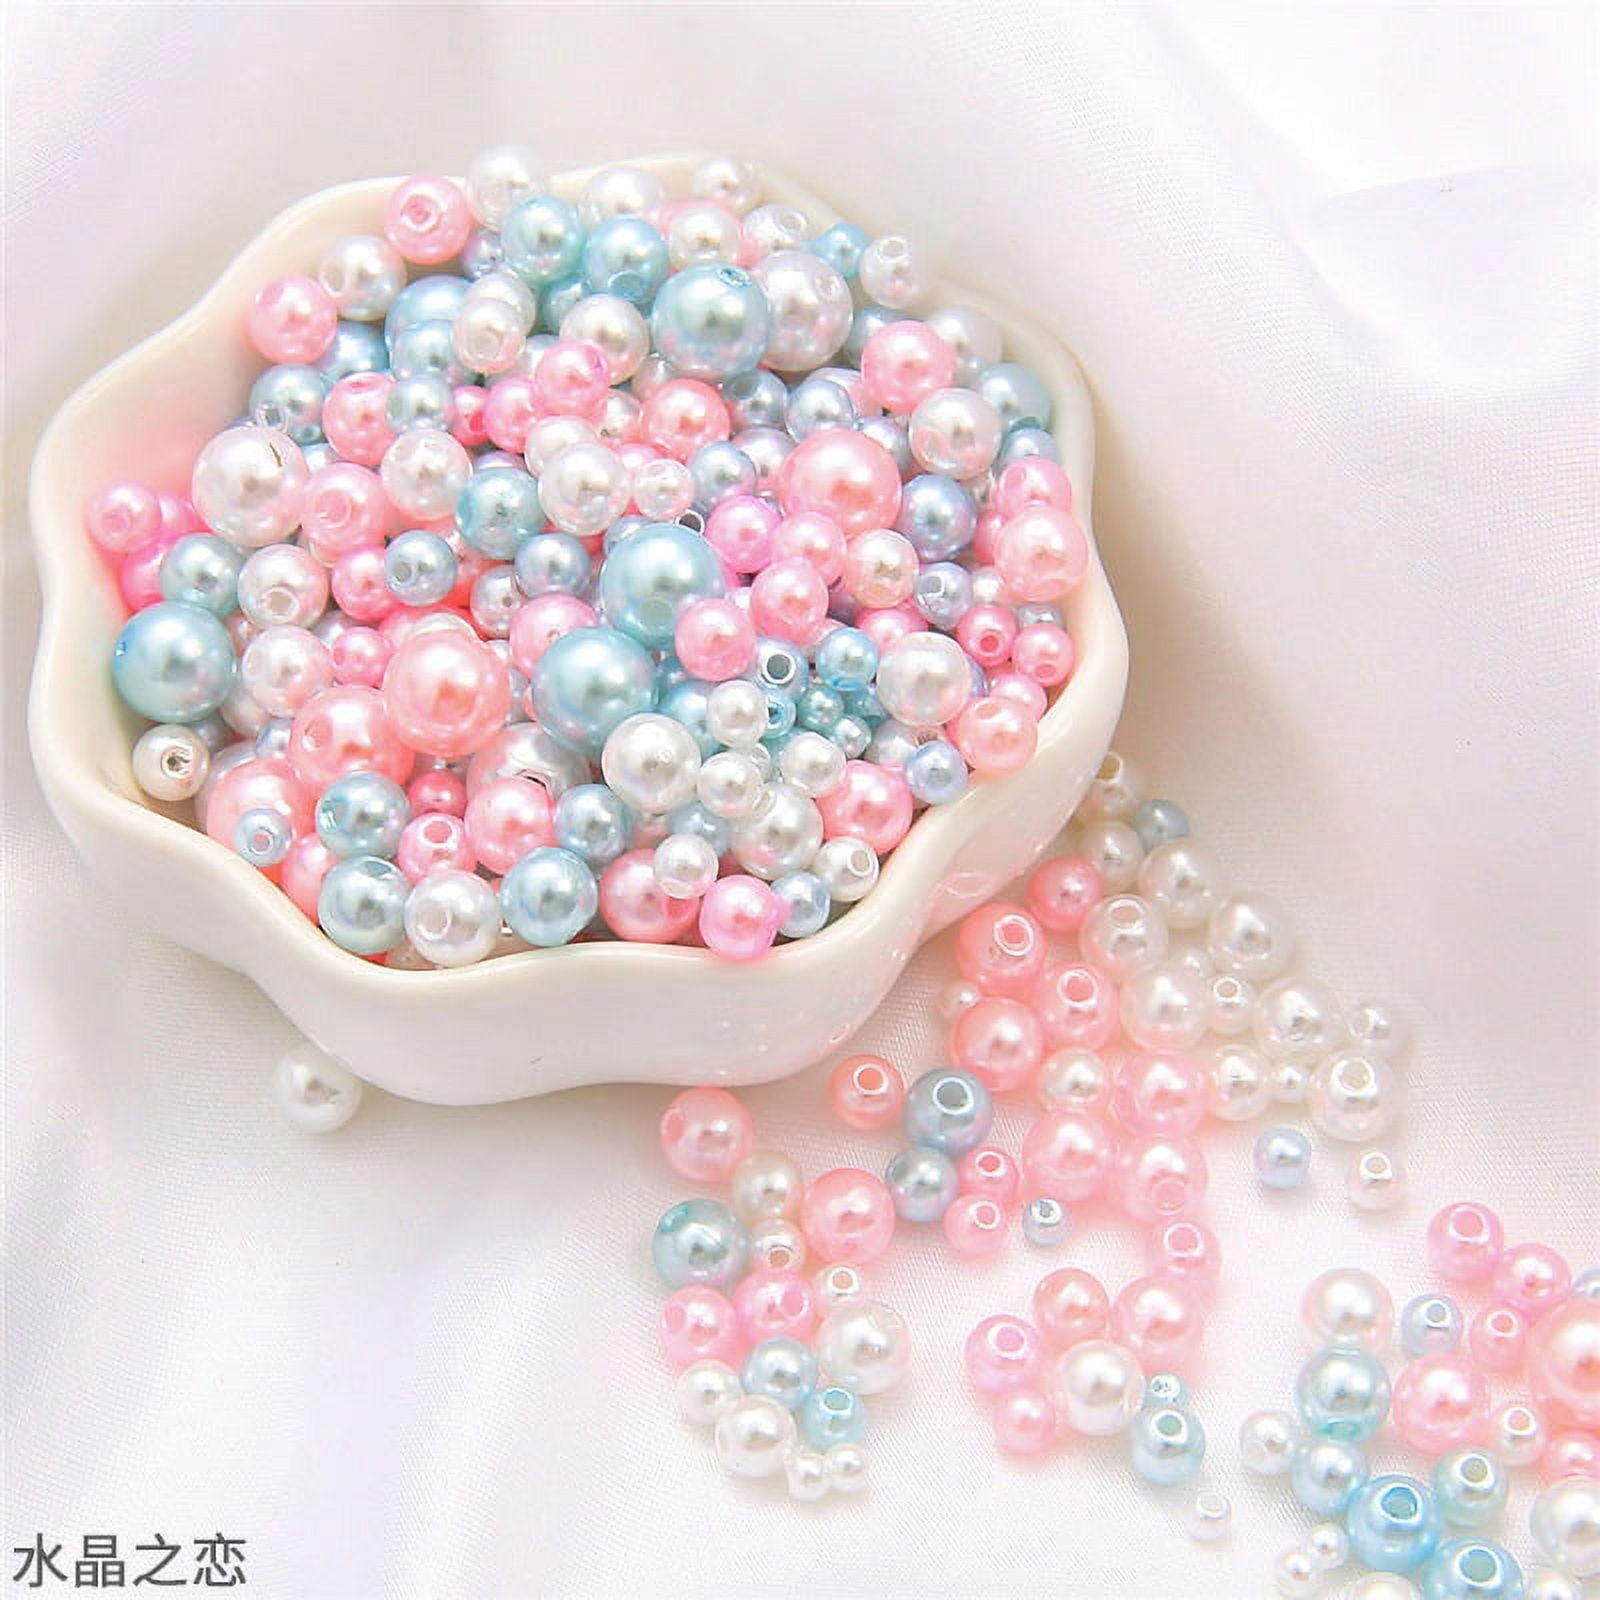 XSEINO Pearl Beads，3200PCS 8mm and 6mm，46 Colors Multicolor Pearl Beads  Loose Pearls for Crafts with Holes for Jewelry Making, Small Pearl Filler